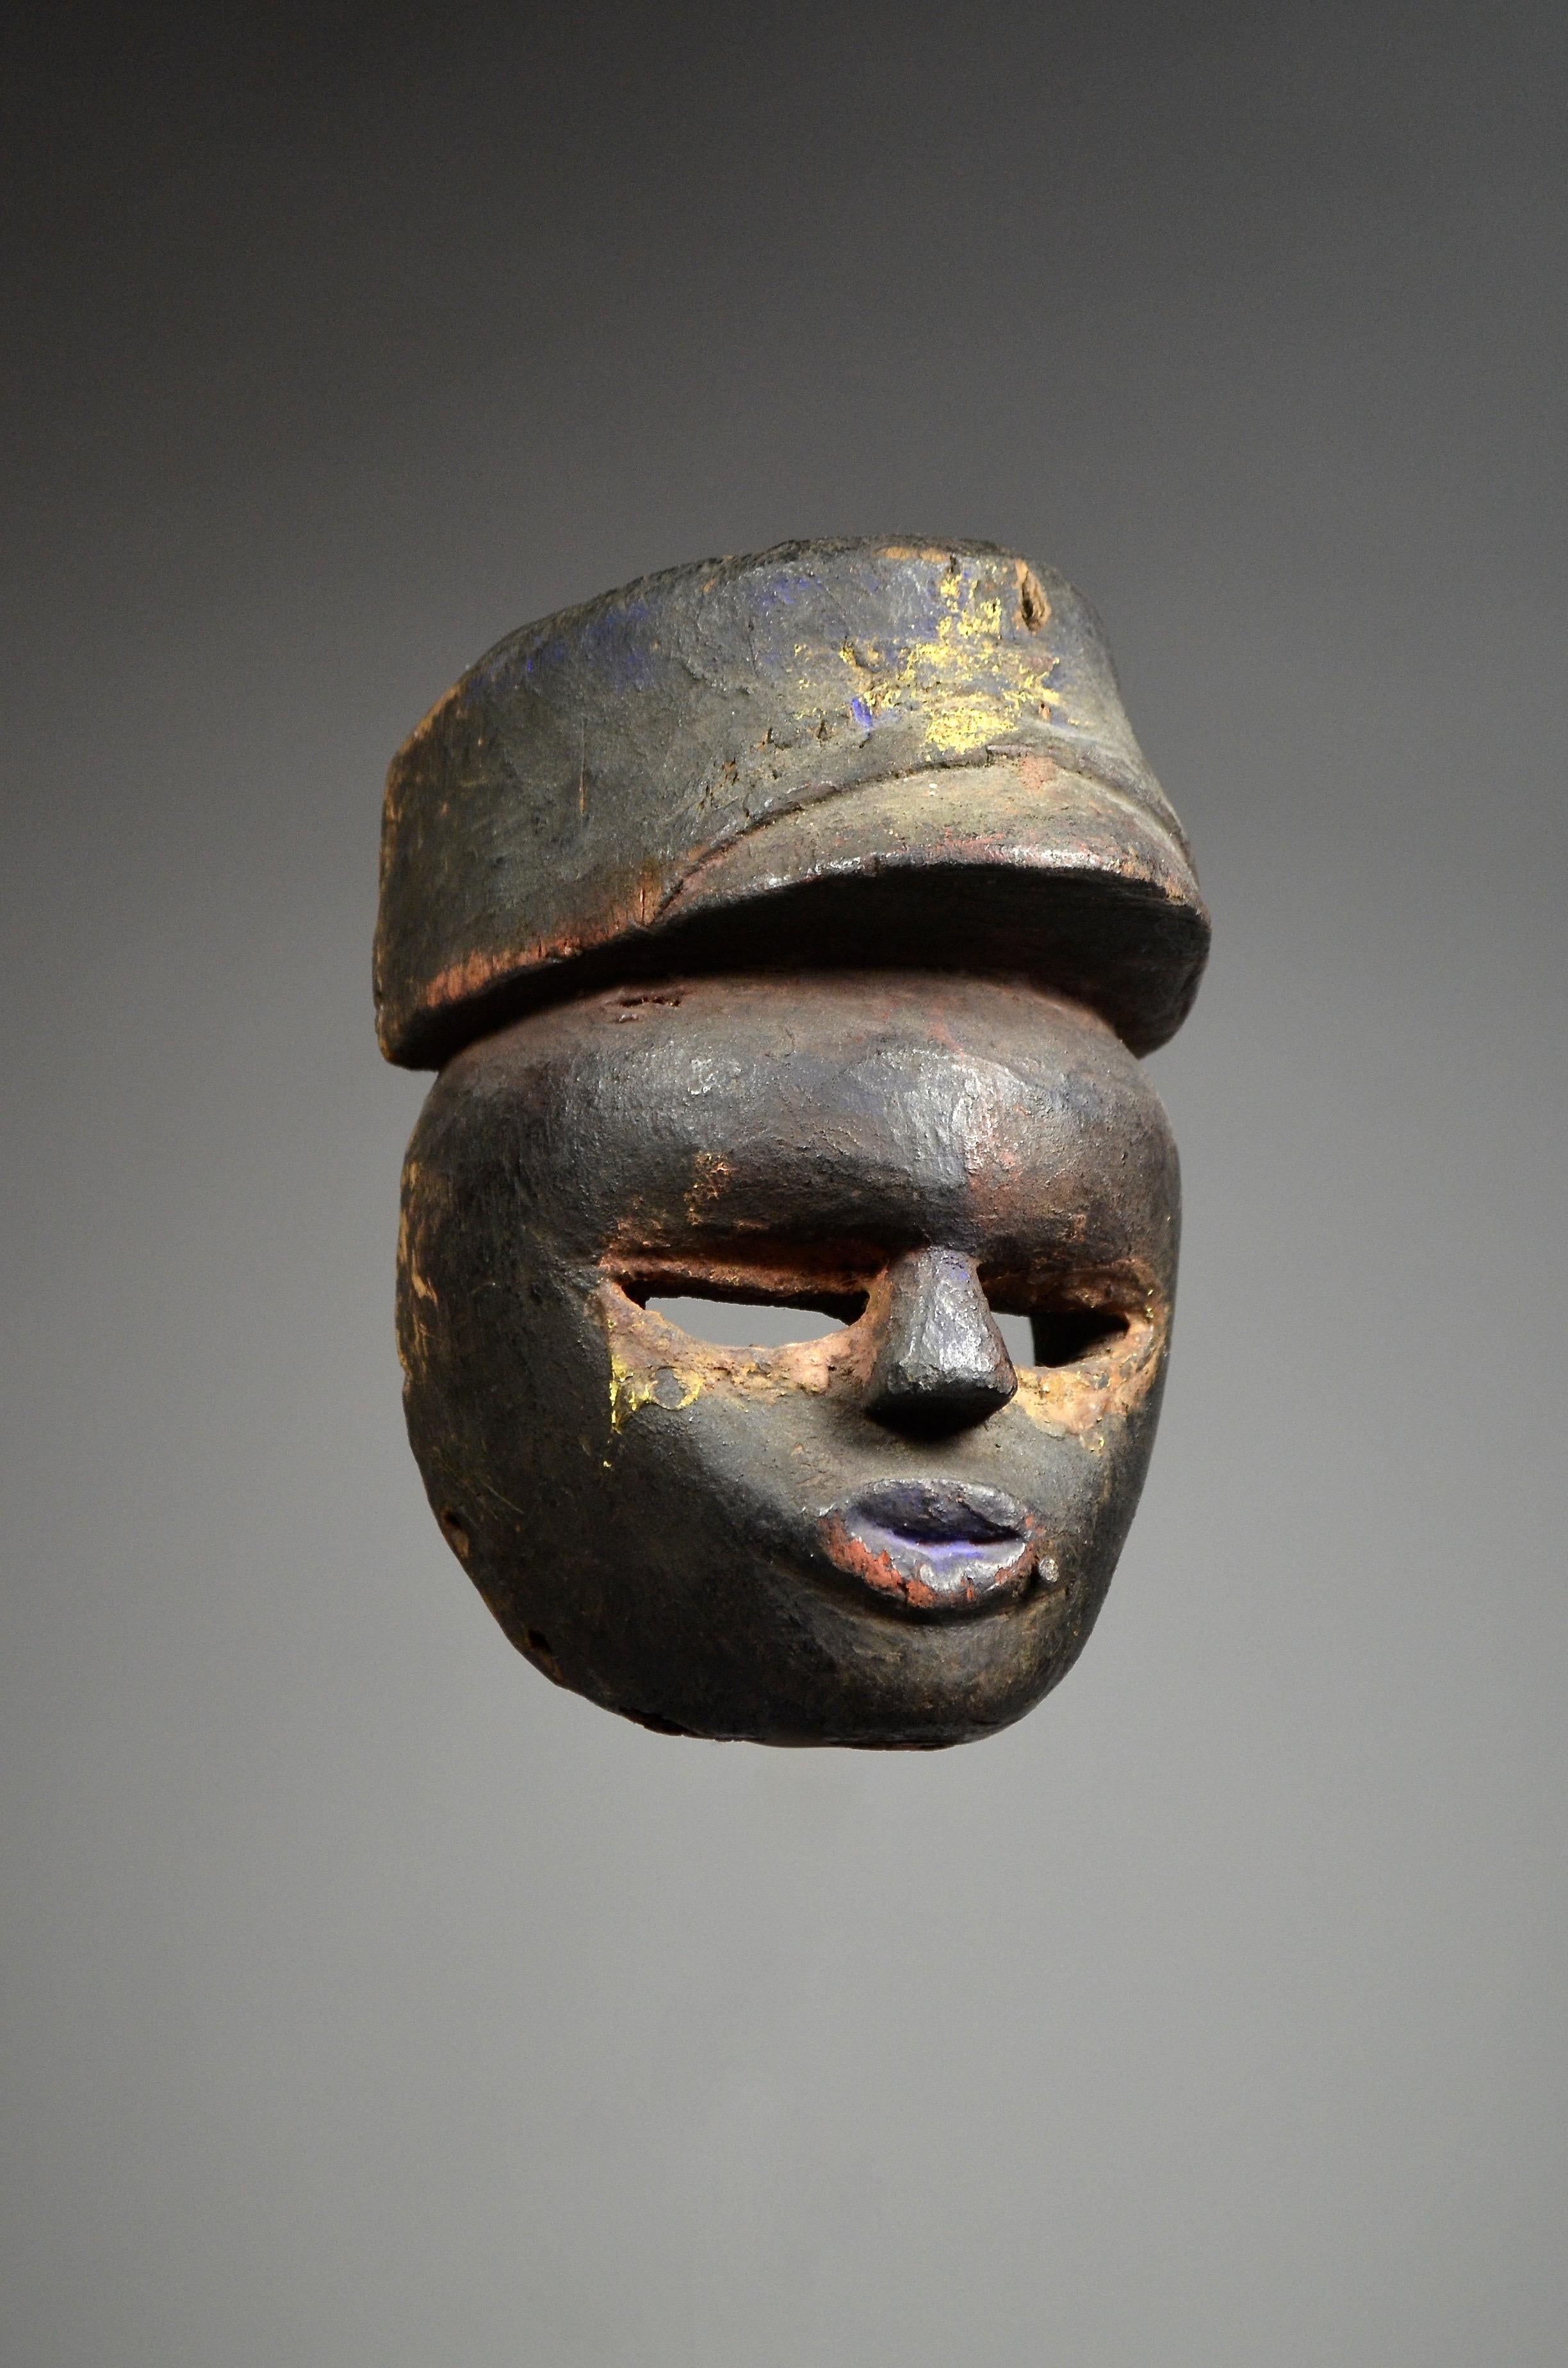 IBIBIO MASK 

Nigeria
Wood
Early 20th Century

Provenance:
- ex Helmut Zake (1918-1995) collection, Heidelberg, Germany
- Native auction, Brussels, Belgium

A rare well-used Ibibio mask from Nigeria wearing a hat. 
Traces of original